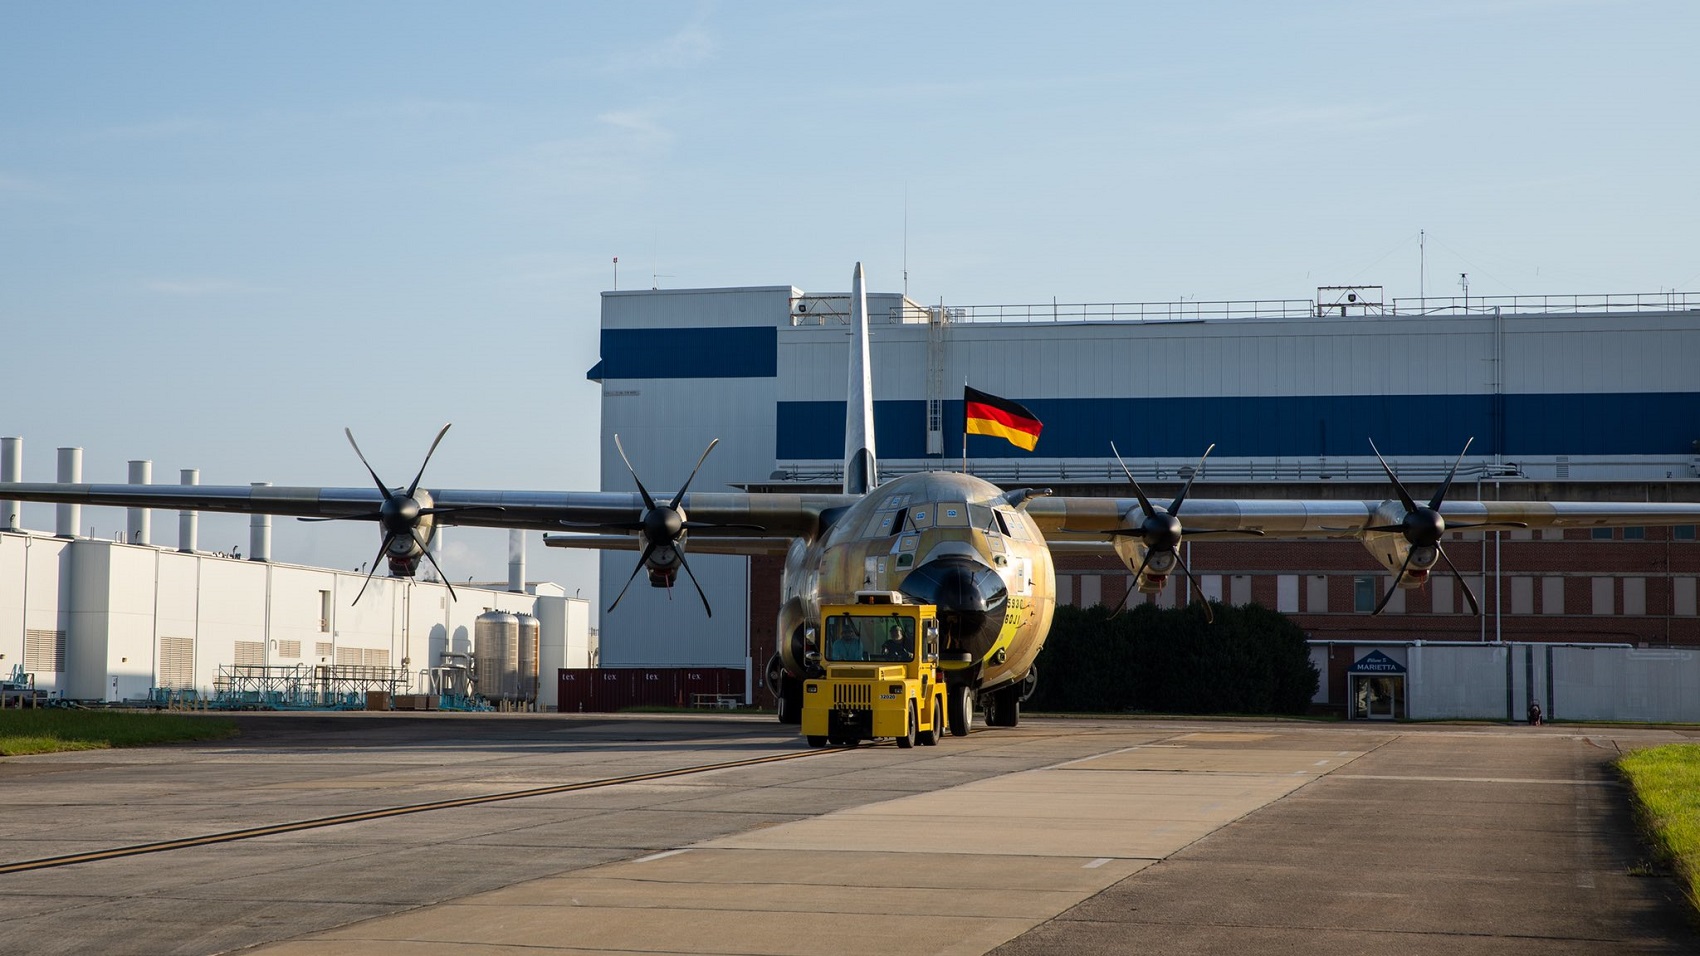 Lockheed Martin Rollout of the German Air Force C-130J Super Hercules Military Transport